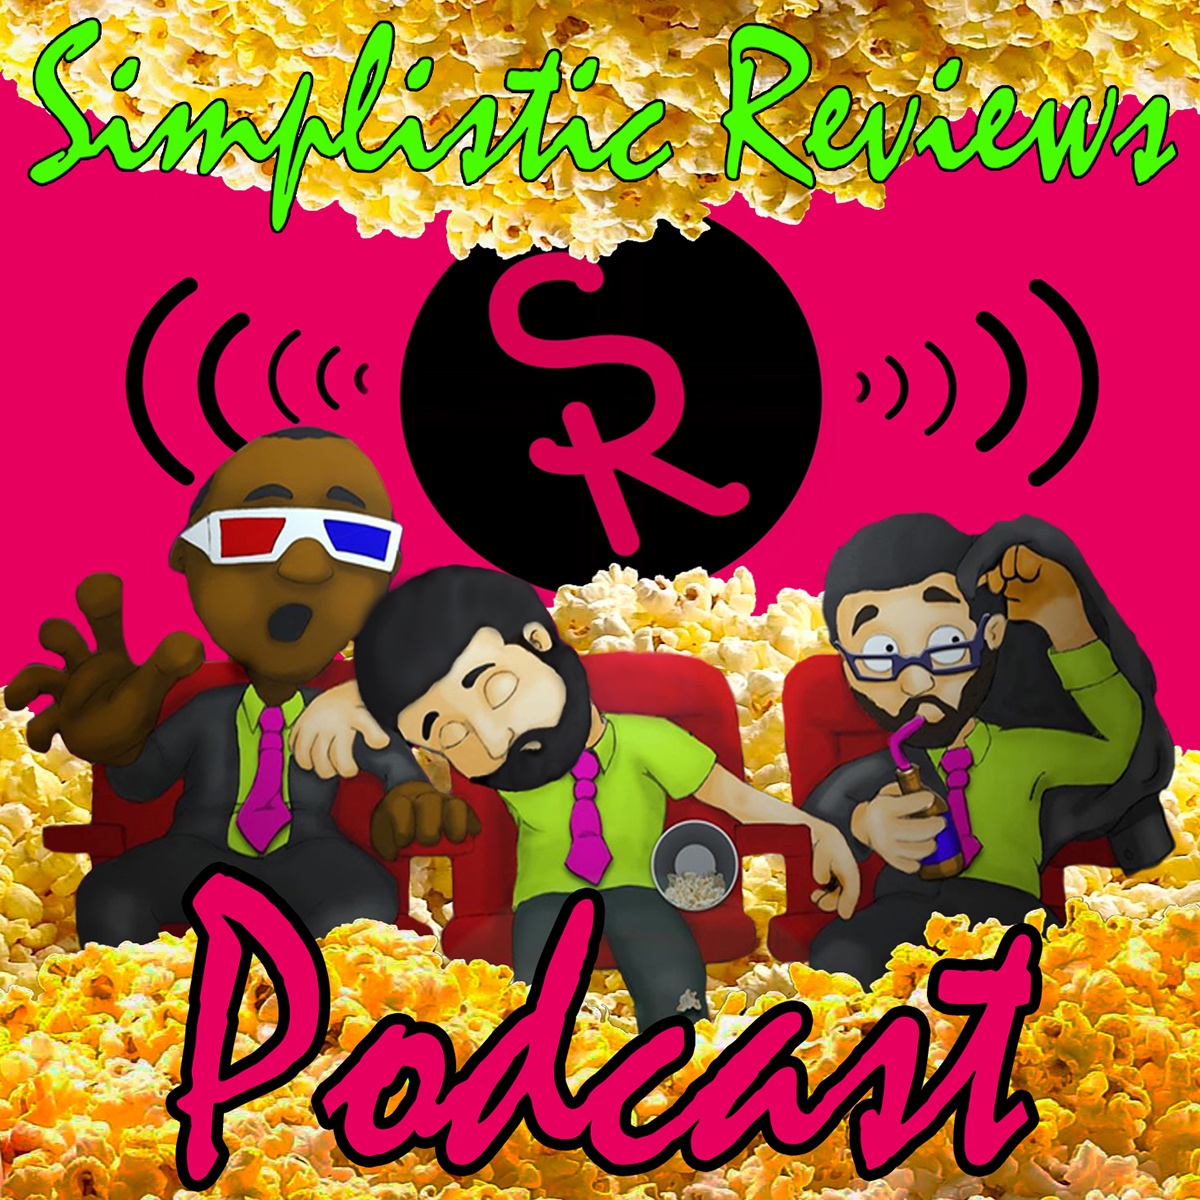 (Ep. 75): Beware! Children at Play - Movie Commentary: October 2016 